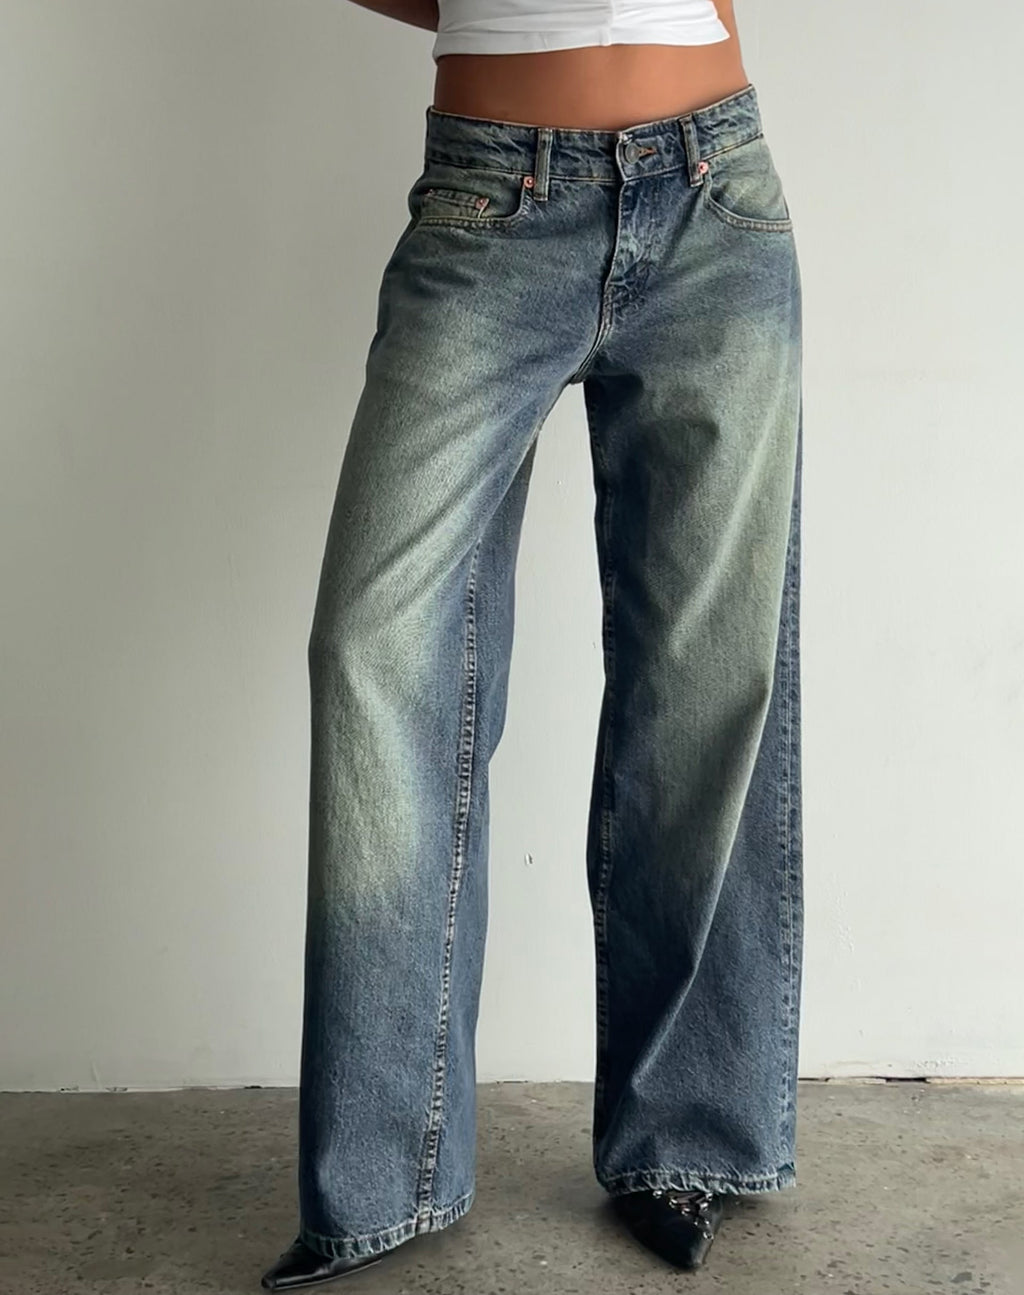 Geräumige extra weite Low Rise Jeans in Extrem Blau Grün